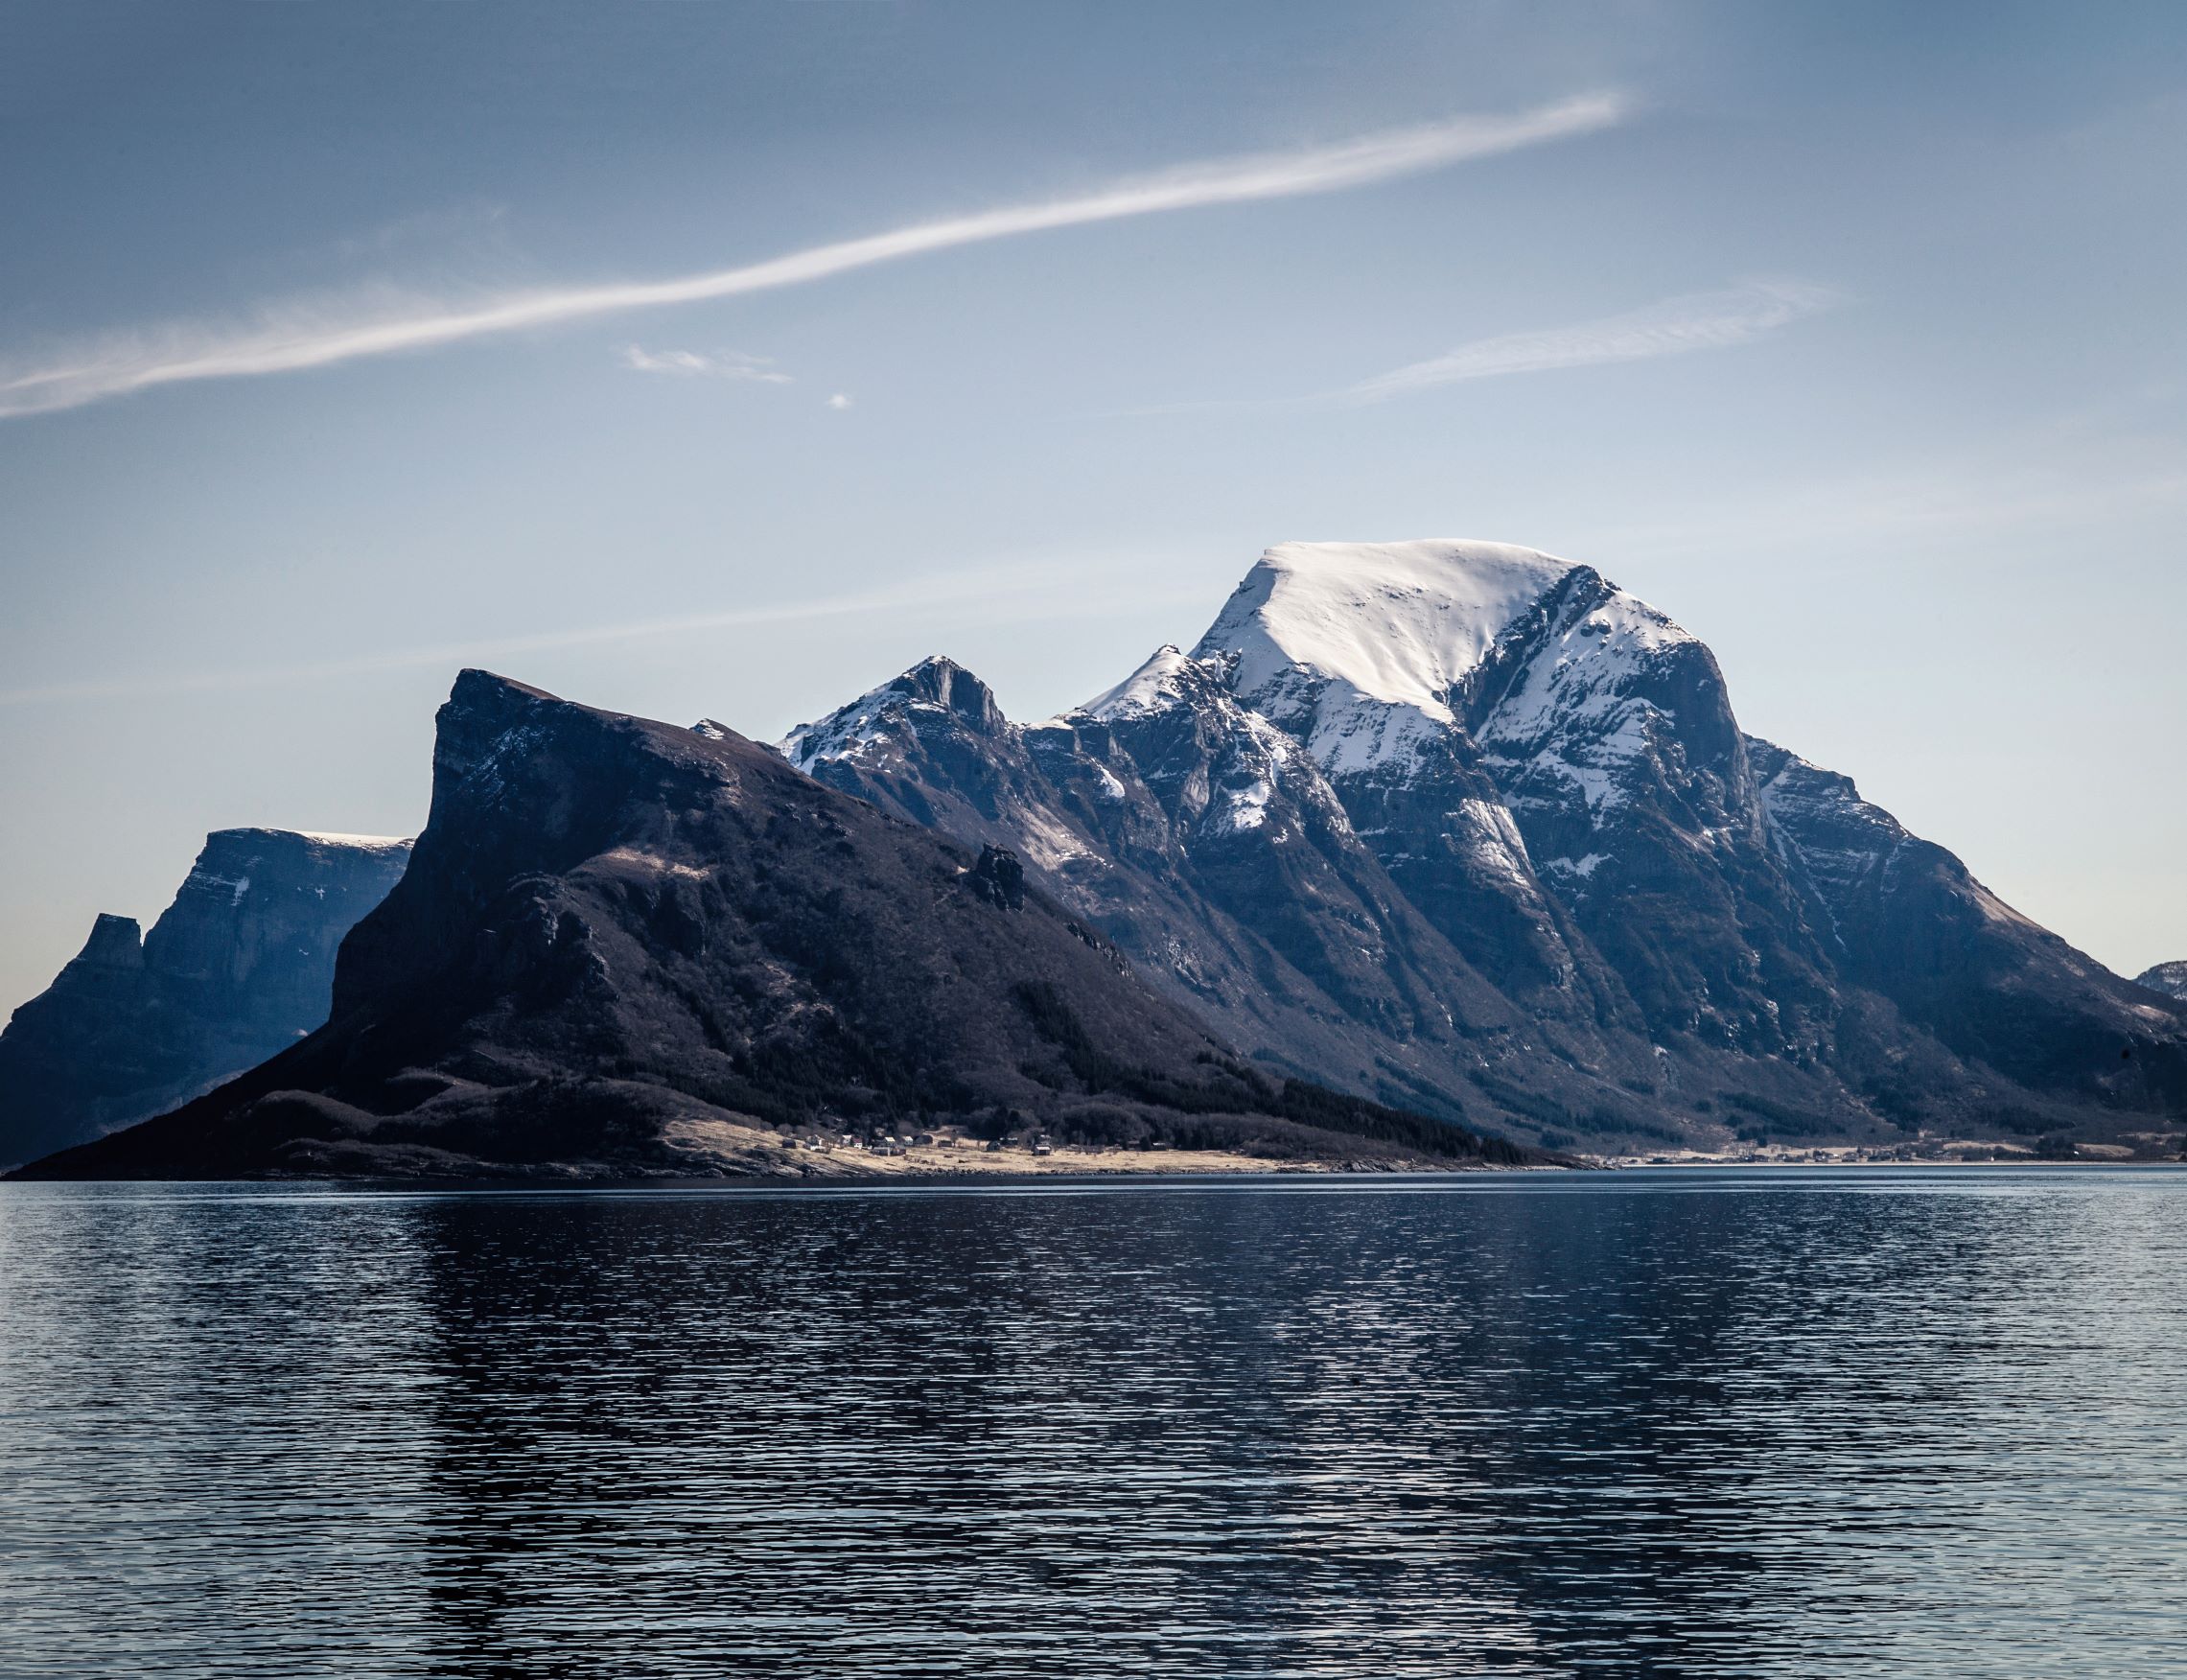 View from the Hurtigruten ferry boat, northern Norway, spring 2013. Photography by Magnus Nilsson